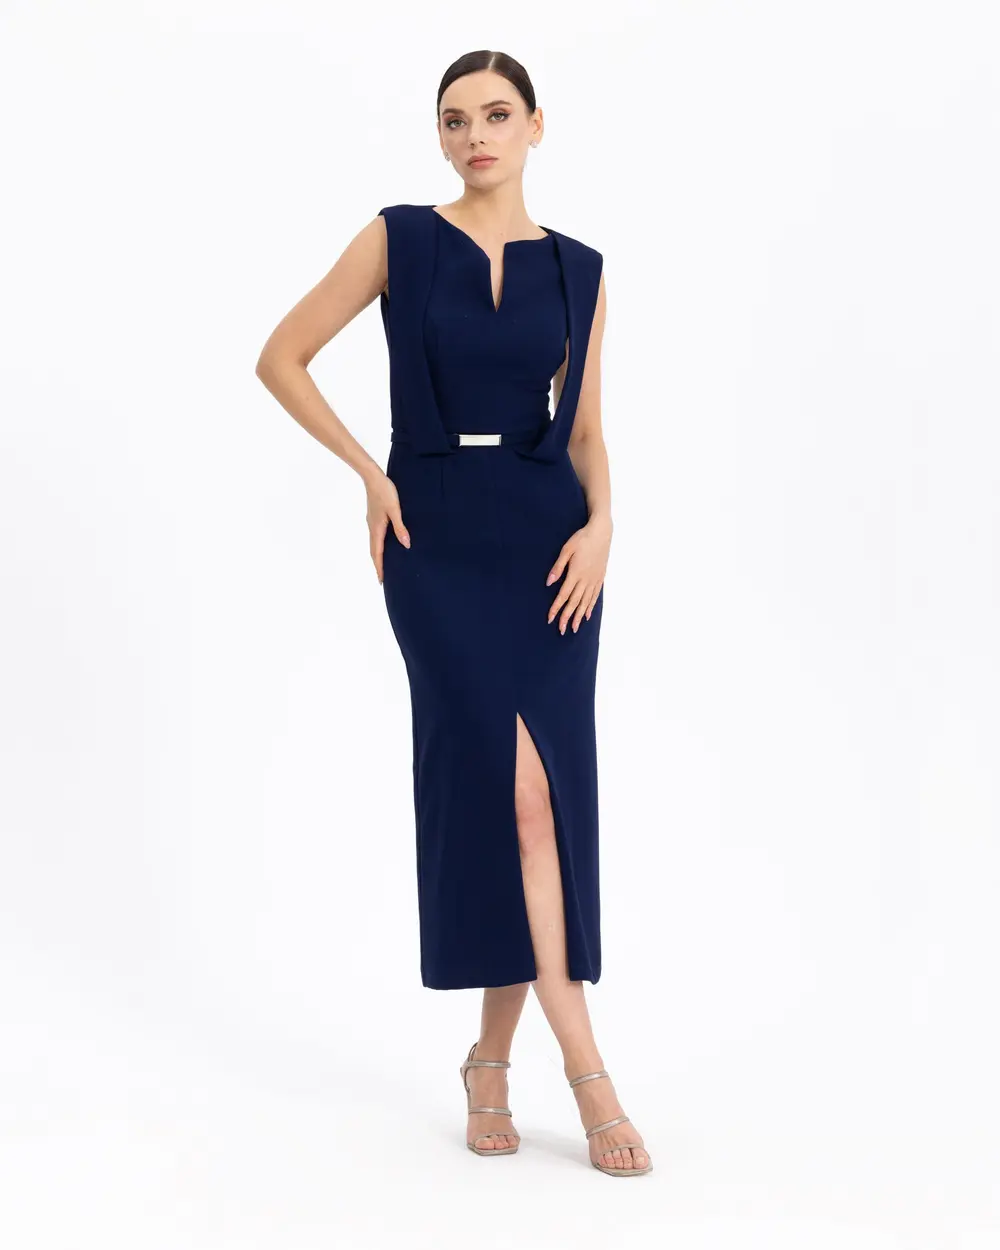  BELTED SLEEVE DETAILED NARROW FORM EVENING DRESS